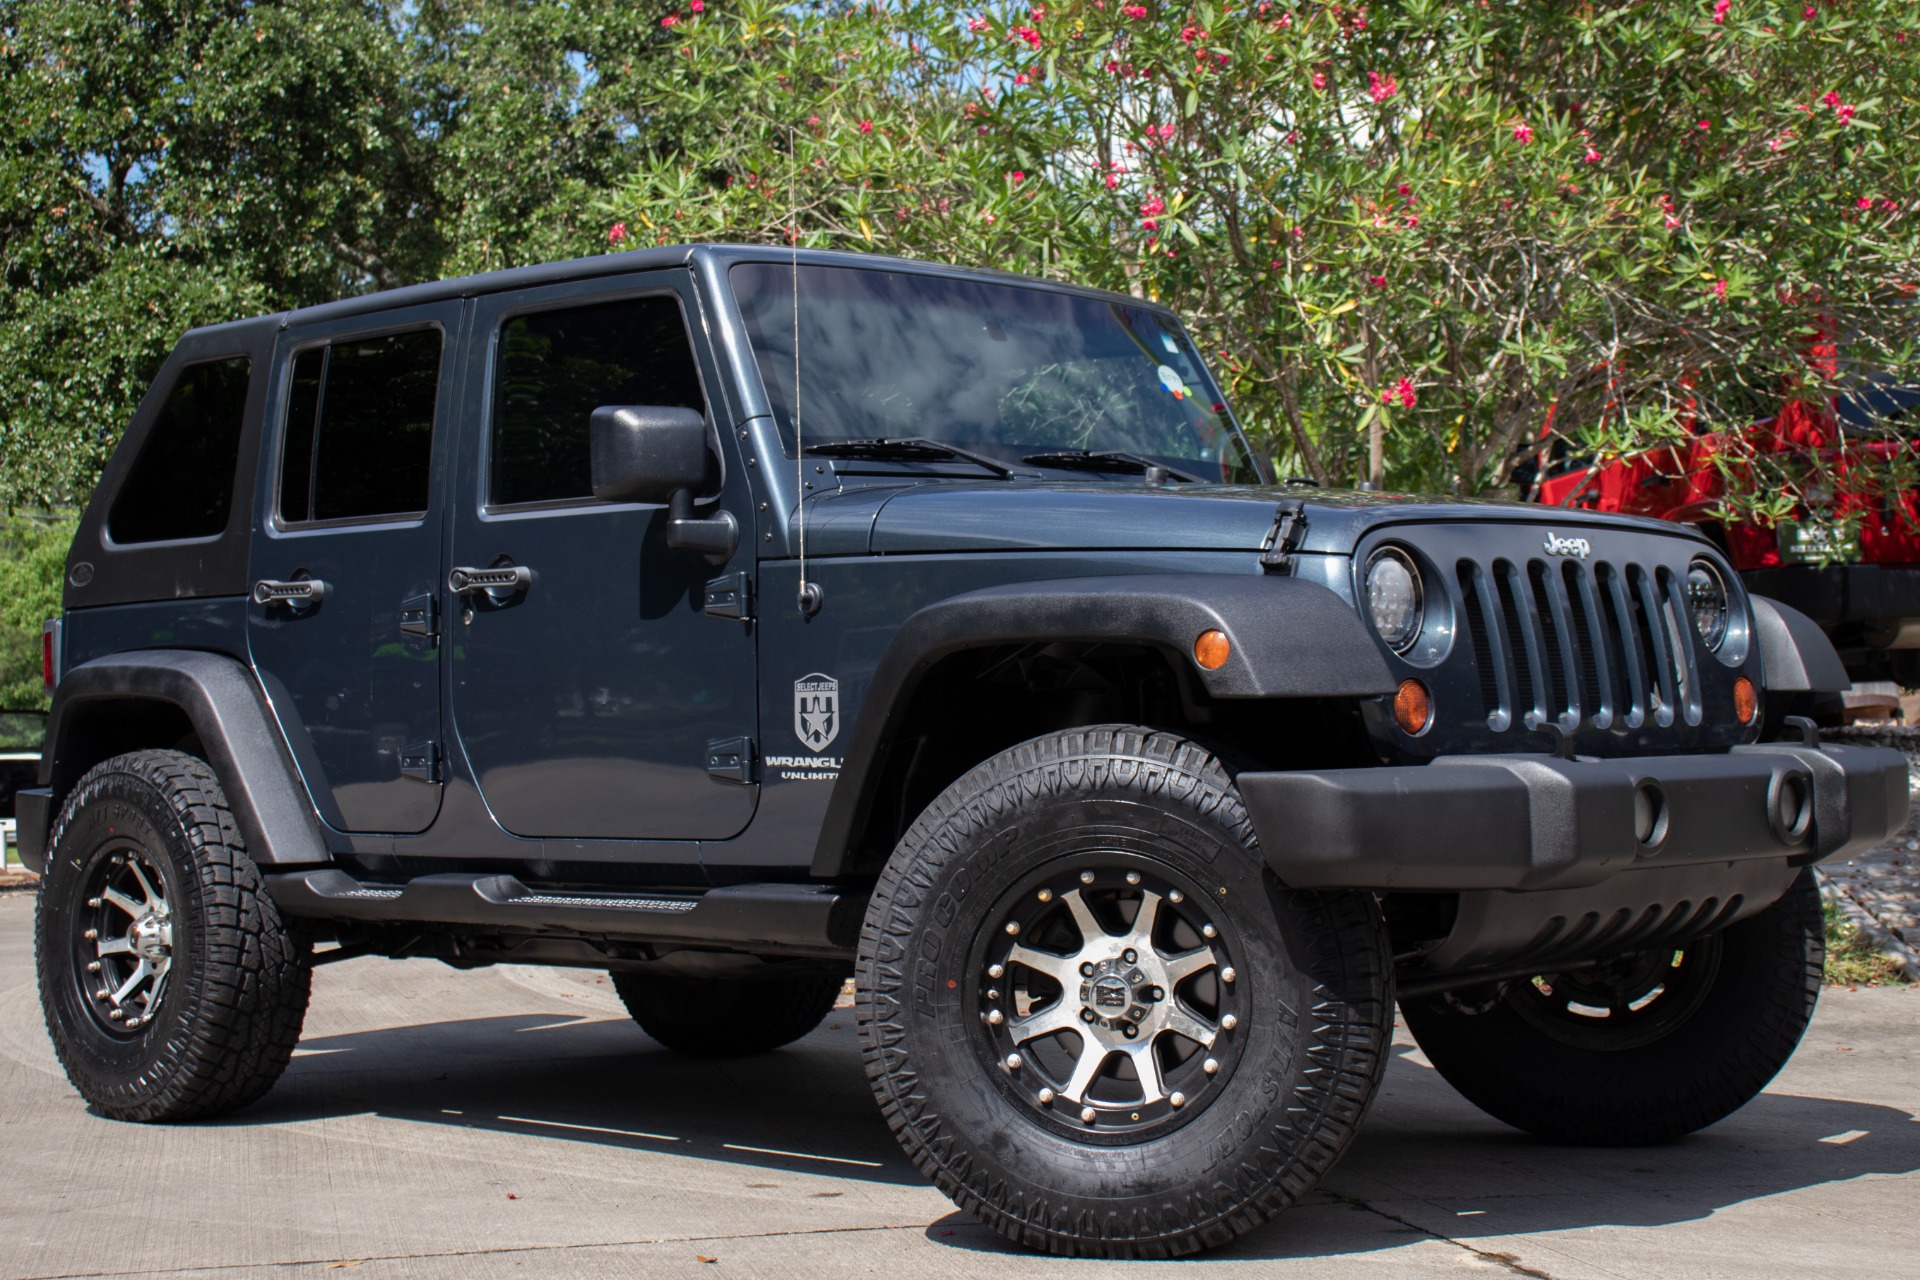 Used 2008 Jeep Wrangler Unlimited X For Sale ($21,995) | Select Jeeps Inc.  Stock #596577